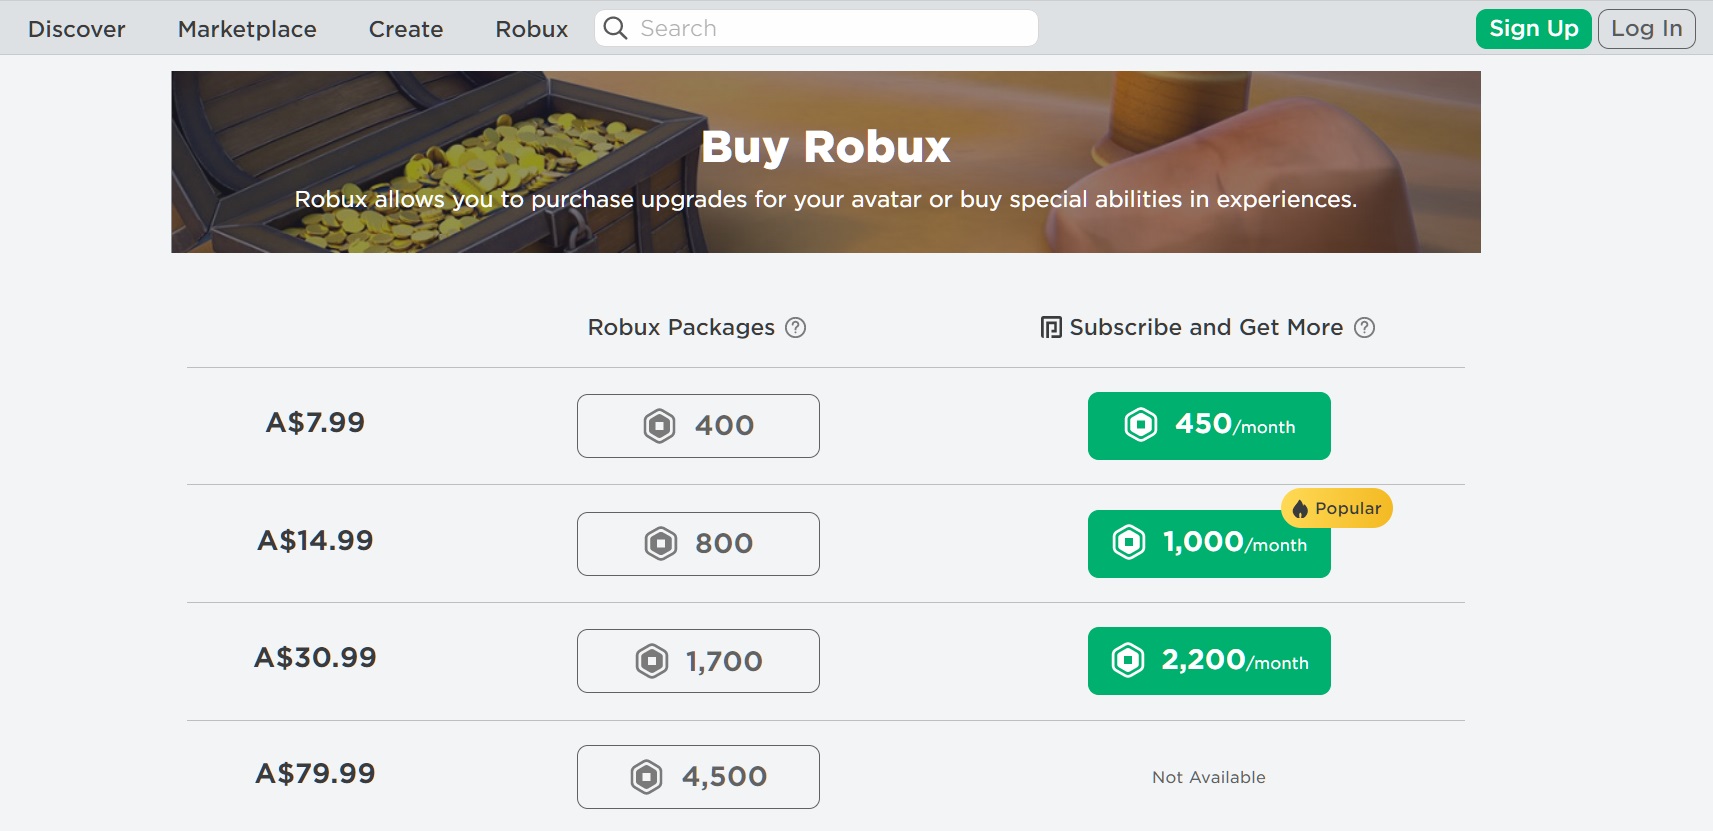 Buy-Robux-virtual-currency-to-buy-things-on-Roblox-Financial-Education-for-Kids-and-Learn-about-Xero-Marketplace-of-App-Integrations-with-Online-Training-Courses